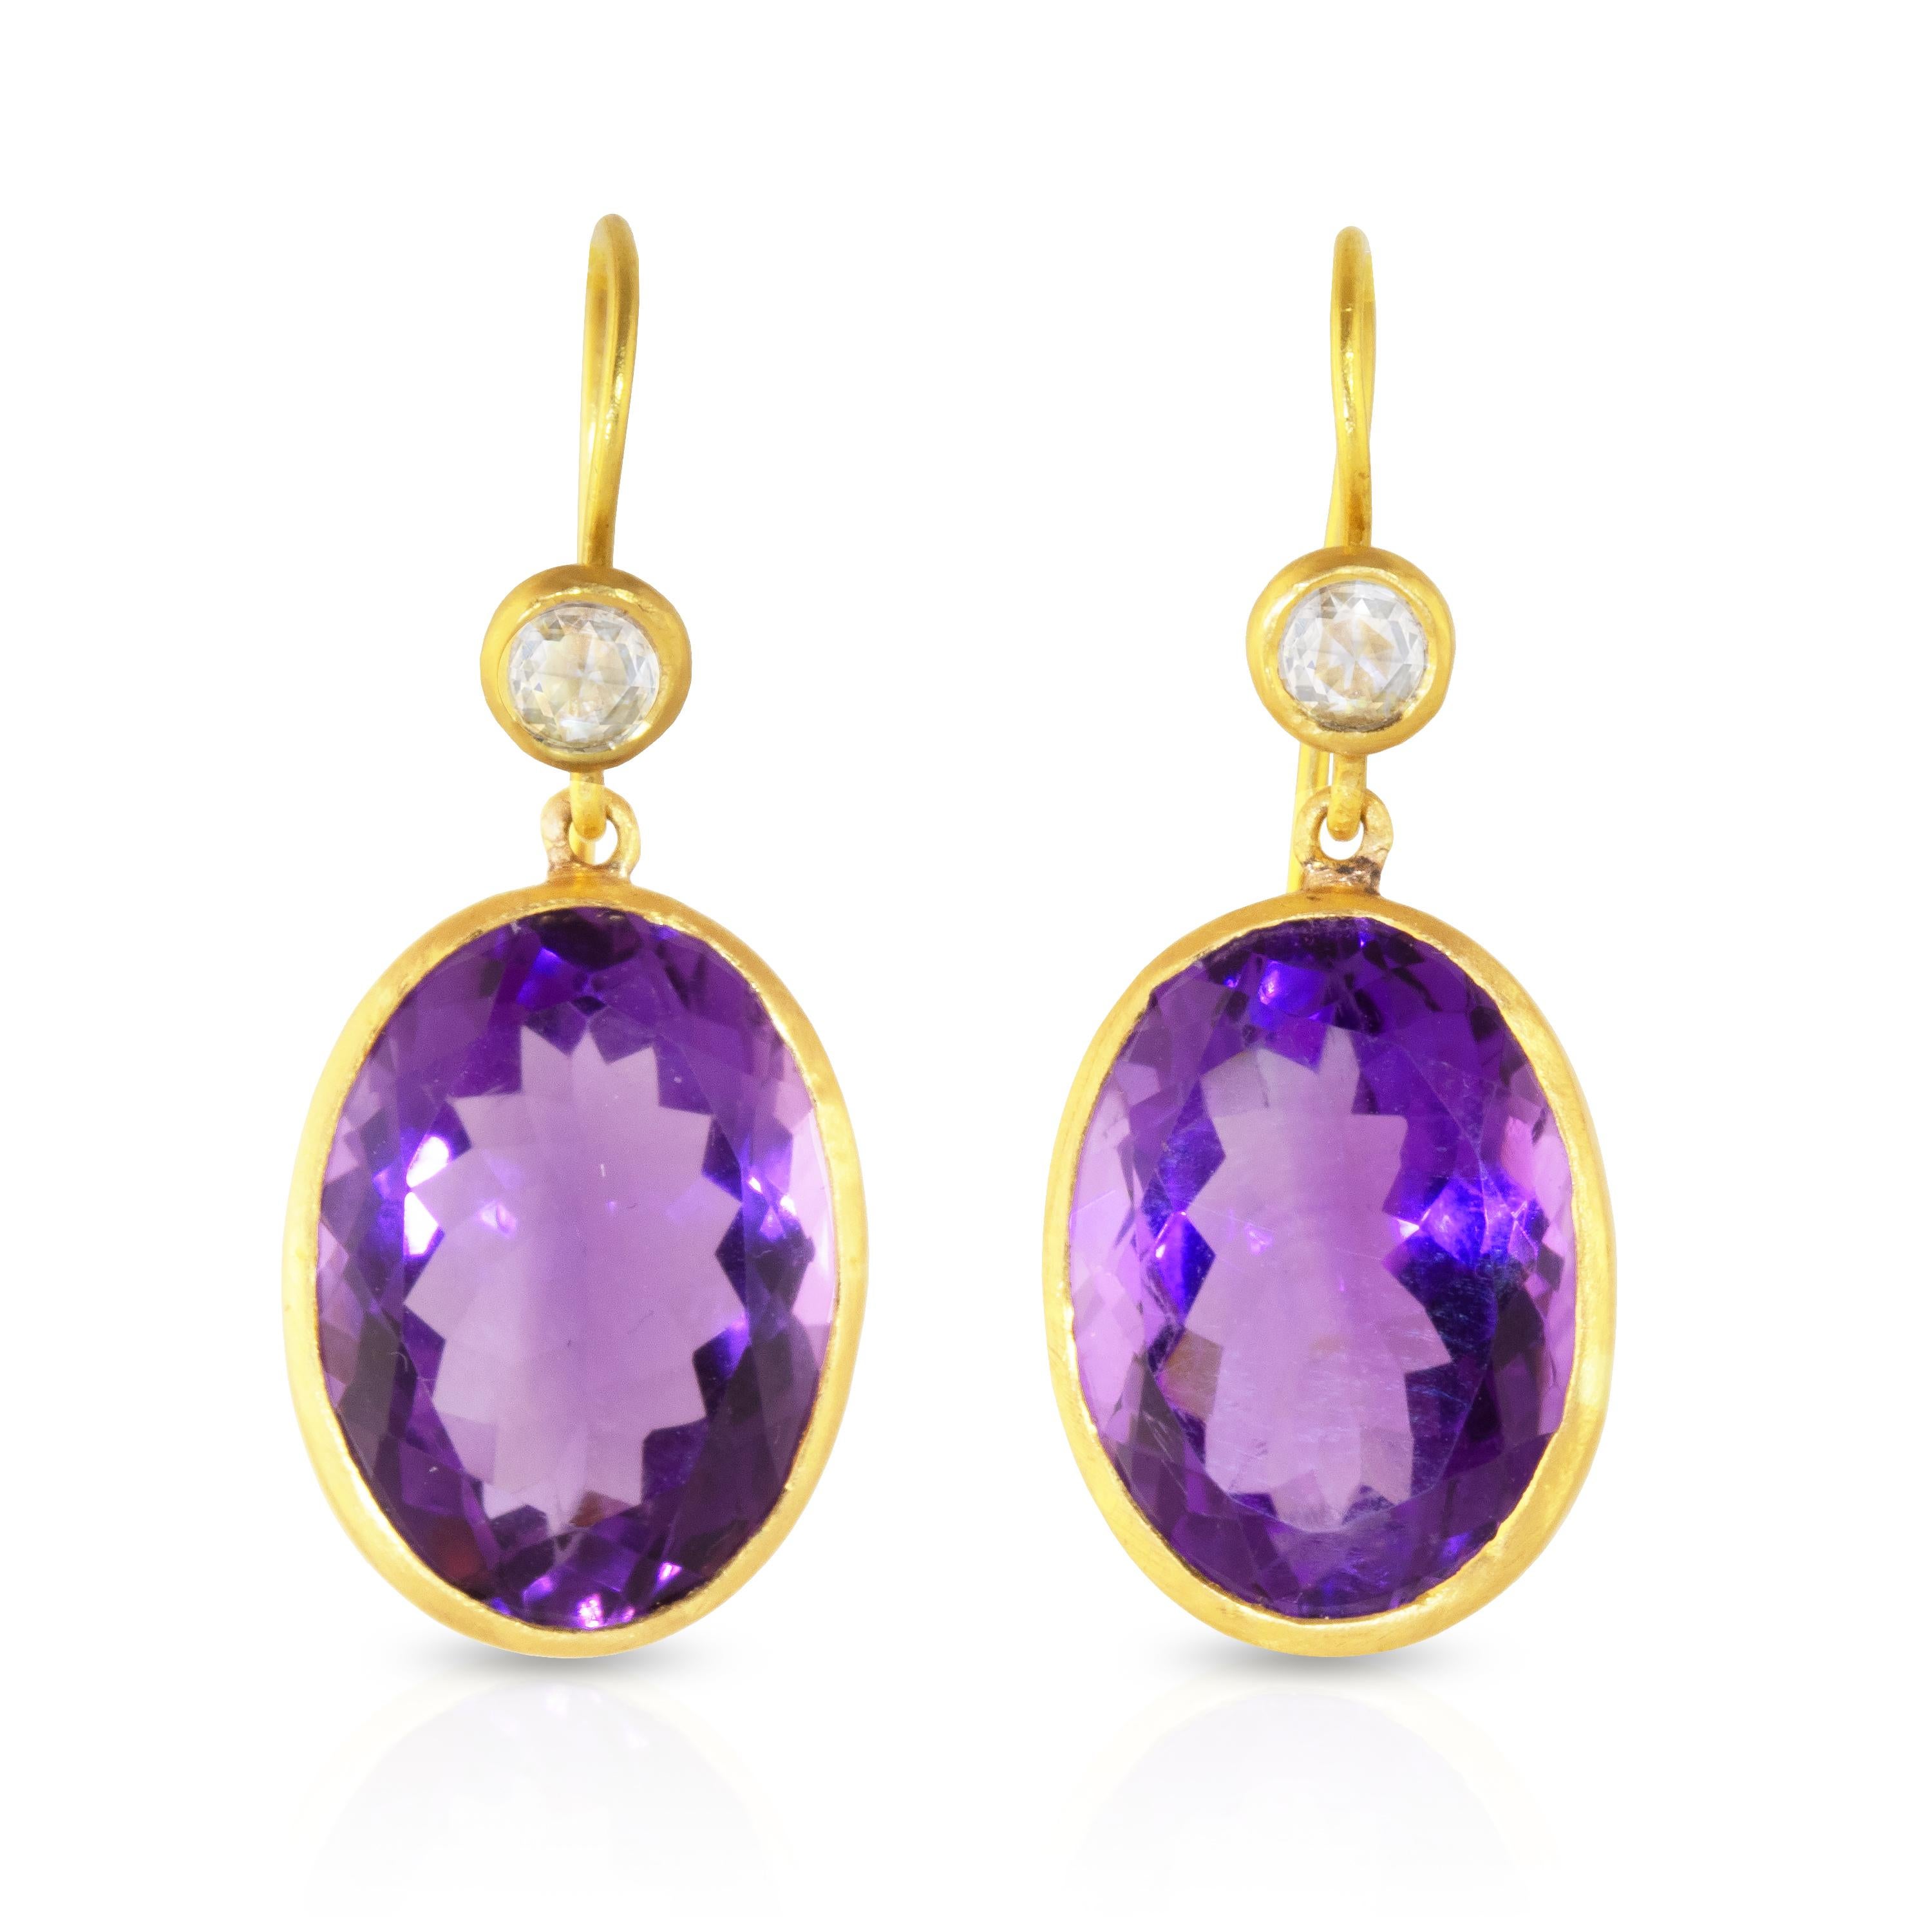 Gorgeous  17.35 carats of Brazilian Amethysts are set in 22k gold and highlighted with .30 carats of rose cut diamonds. 

Amethyst served royalty throughout history and was considered in ancient times to be a precious stone, worth as much as